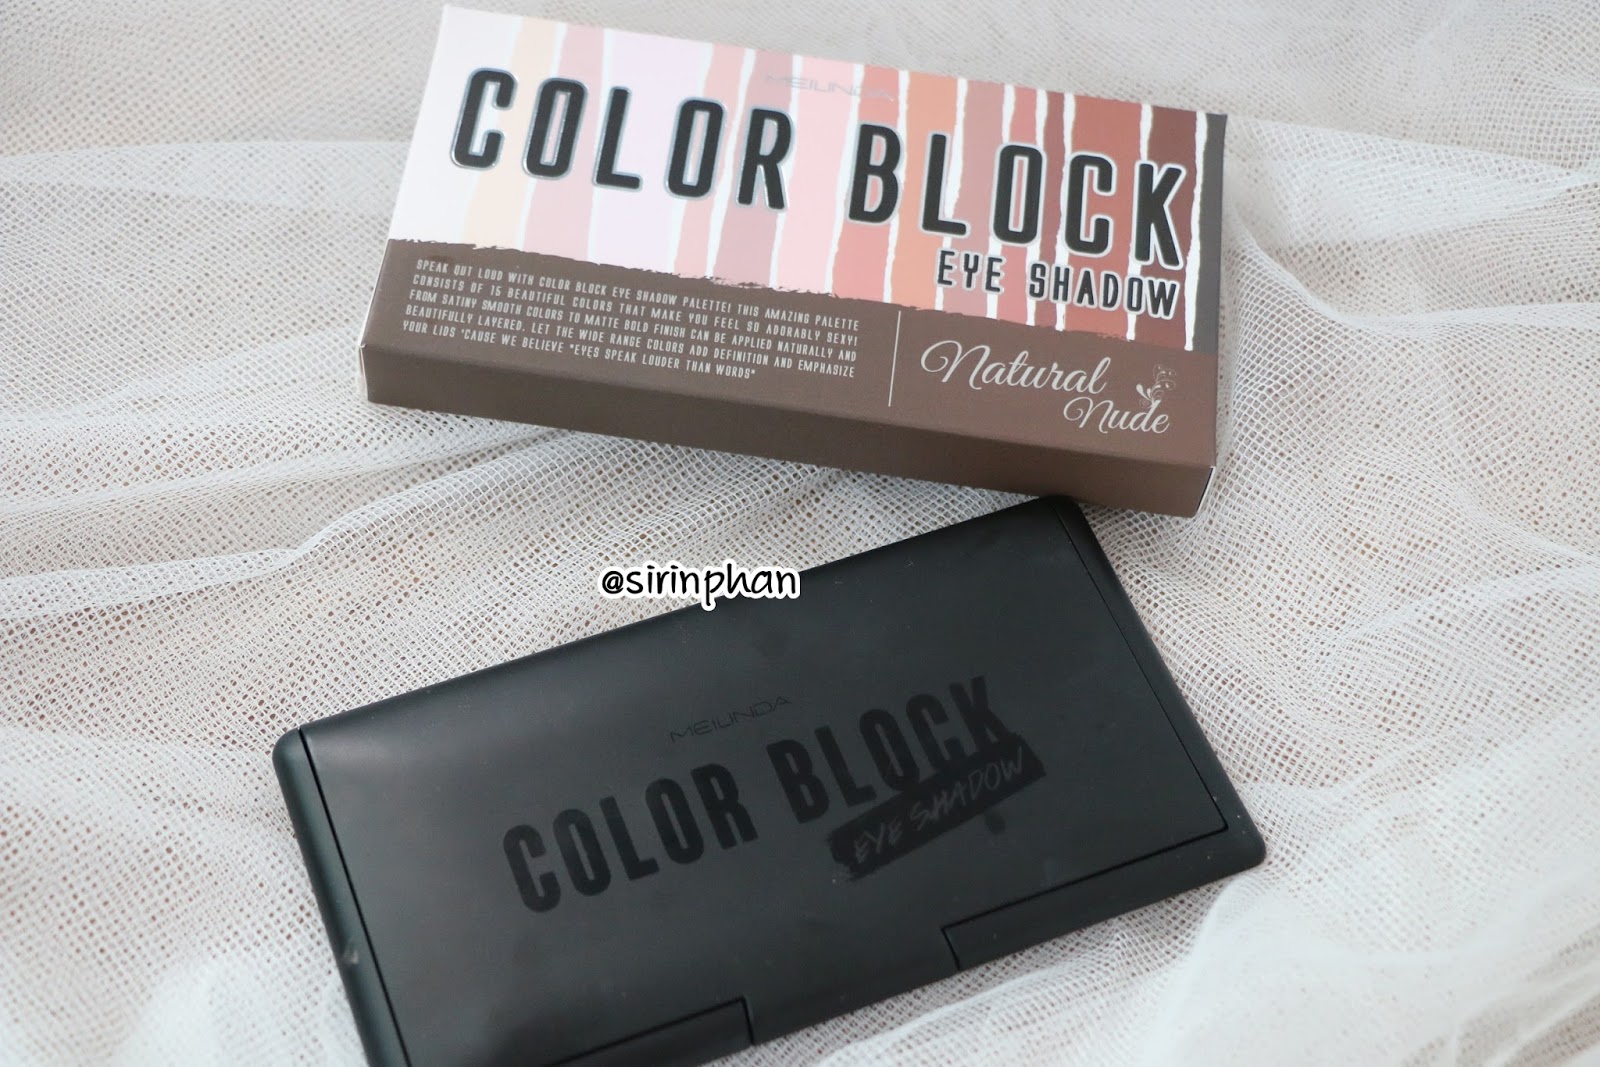 I M An Ordinary Girl Review Mei Linda Color Block Eyeshadow Palette